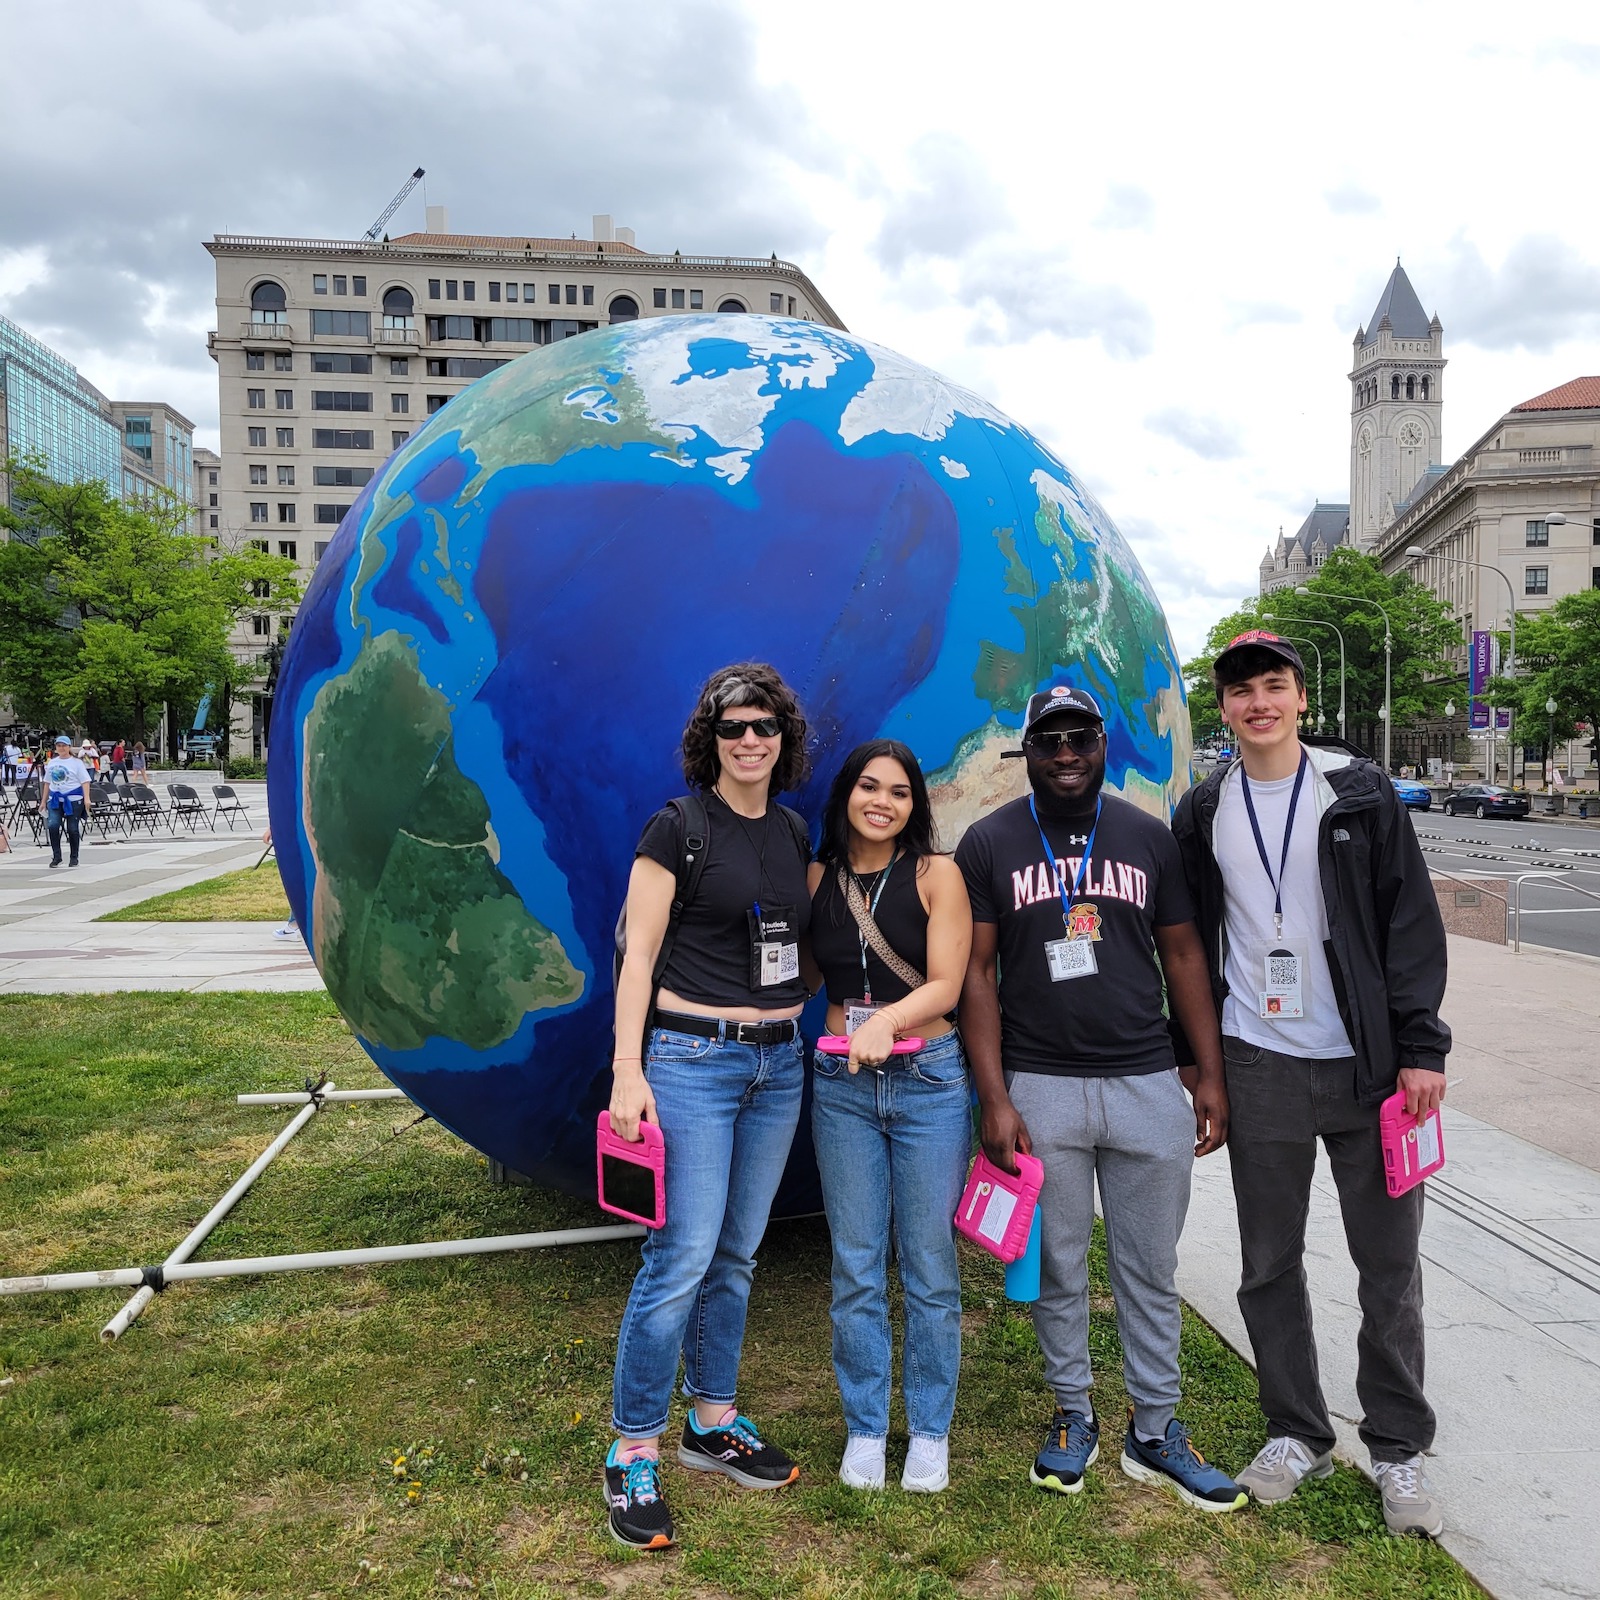 outside on a grassy path next to a street, four people, a female professor and three students, smile and stand in front of a model of the earth, that stands about four or five feet taller than the people.